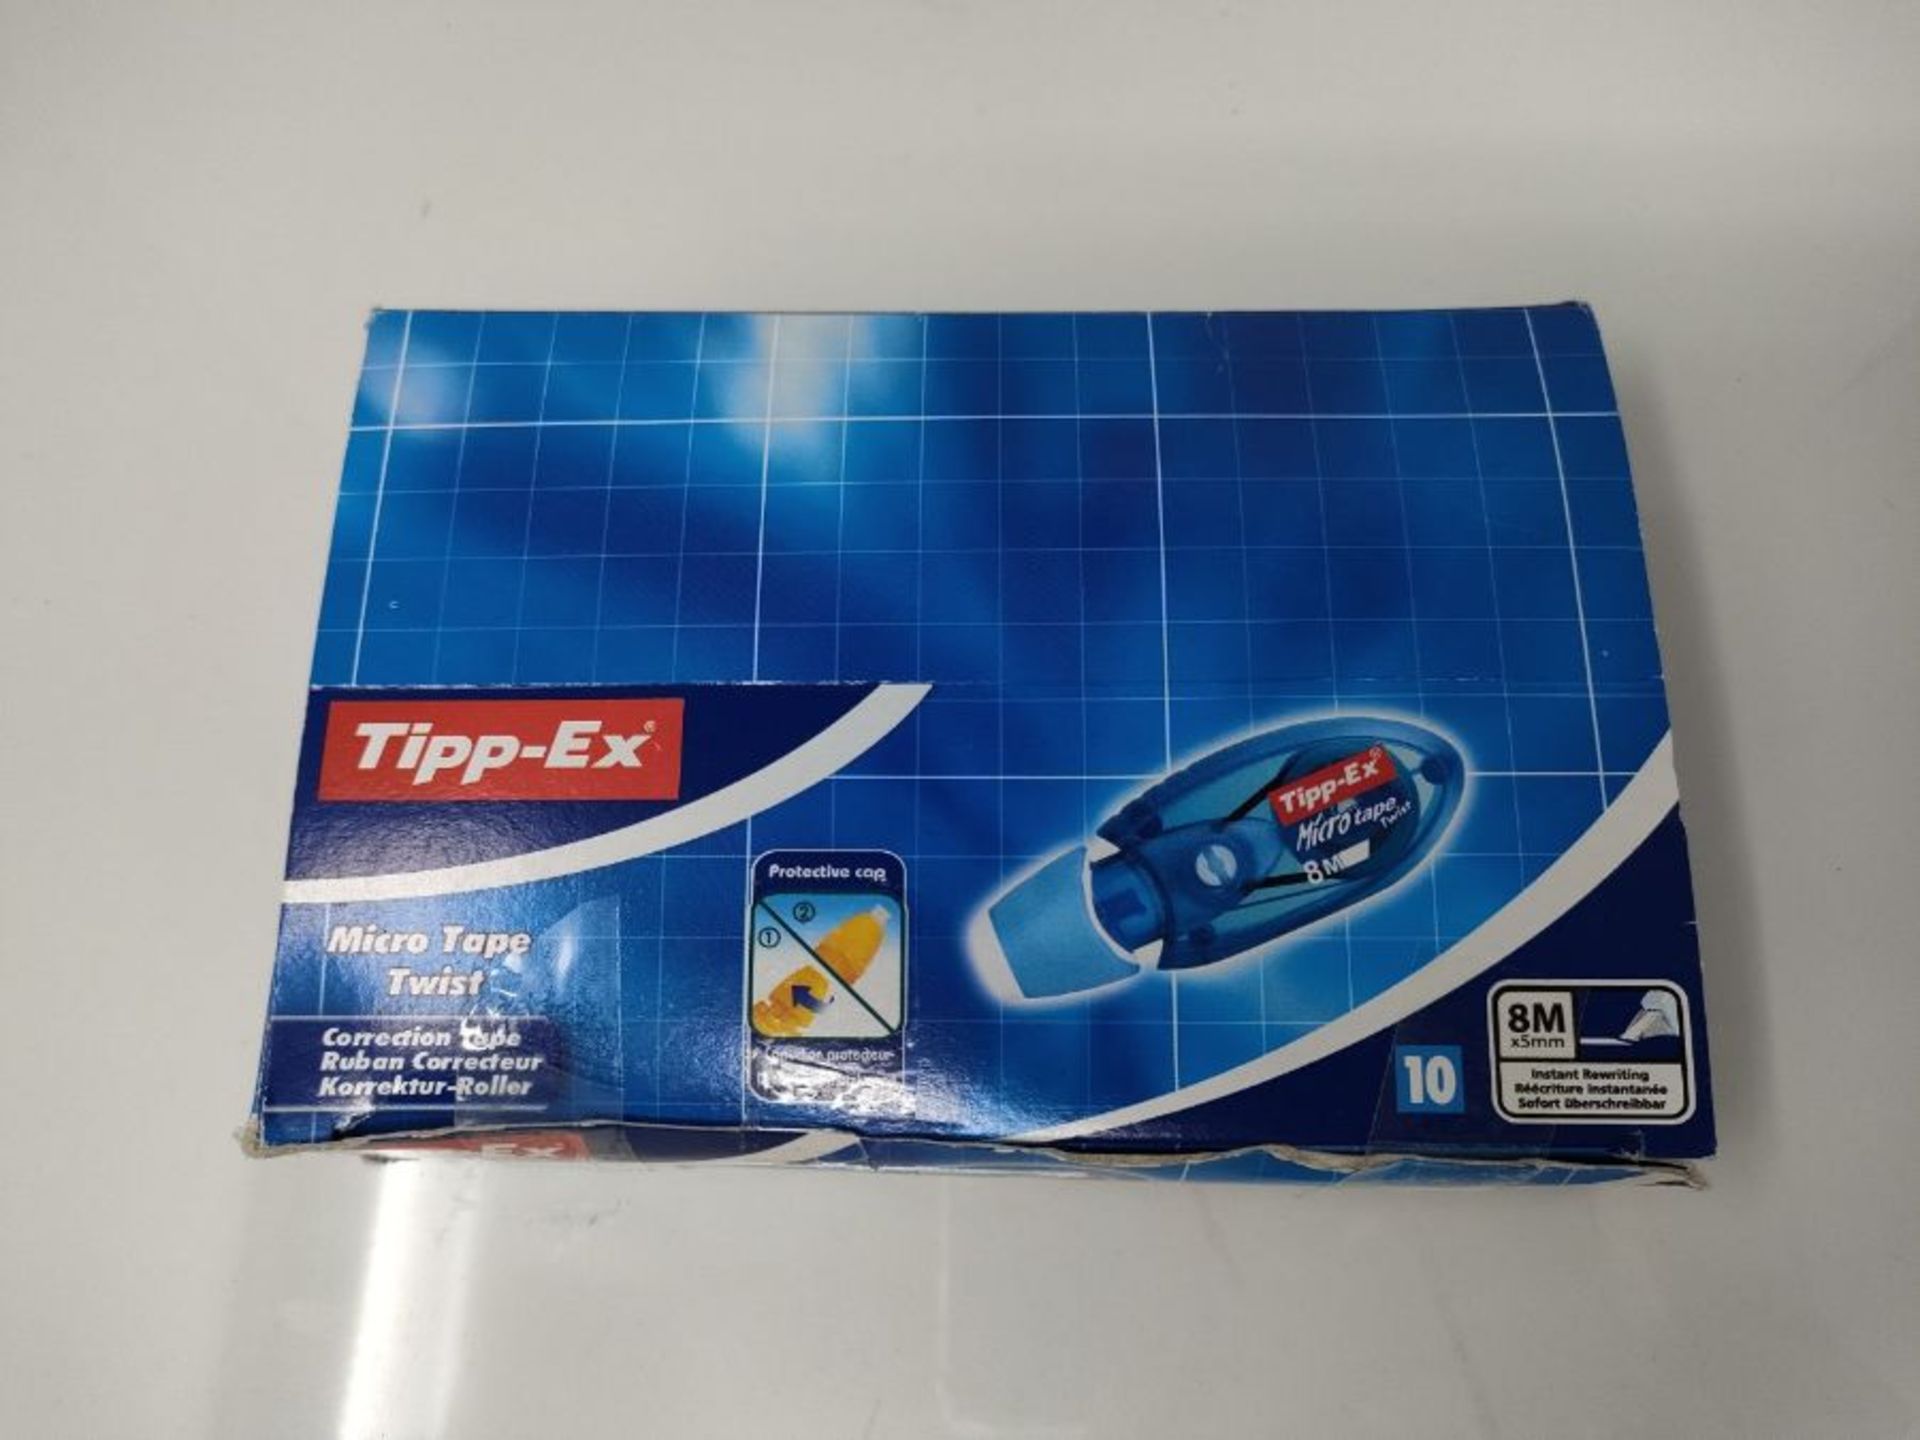 Tipp-Ex Micro Tape Twist Correction Tapes - Blue Body, Box of 10 - Image 2 of 3